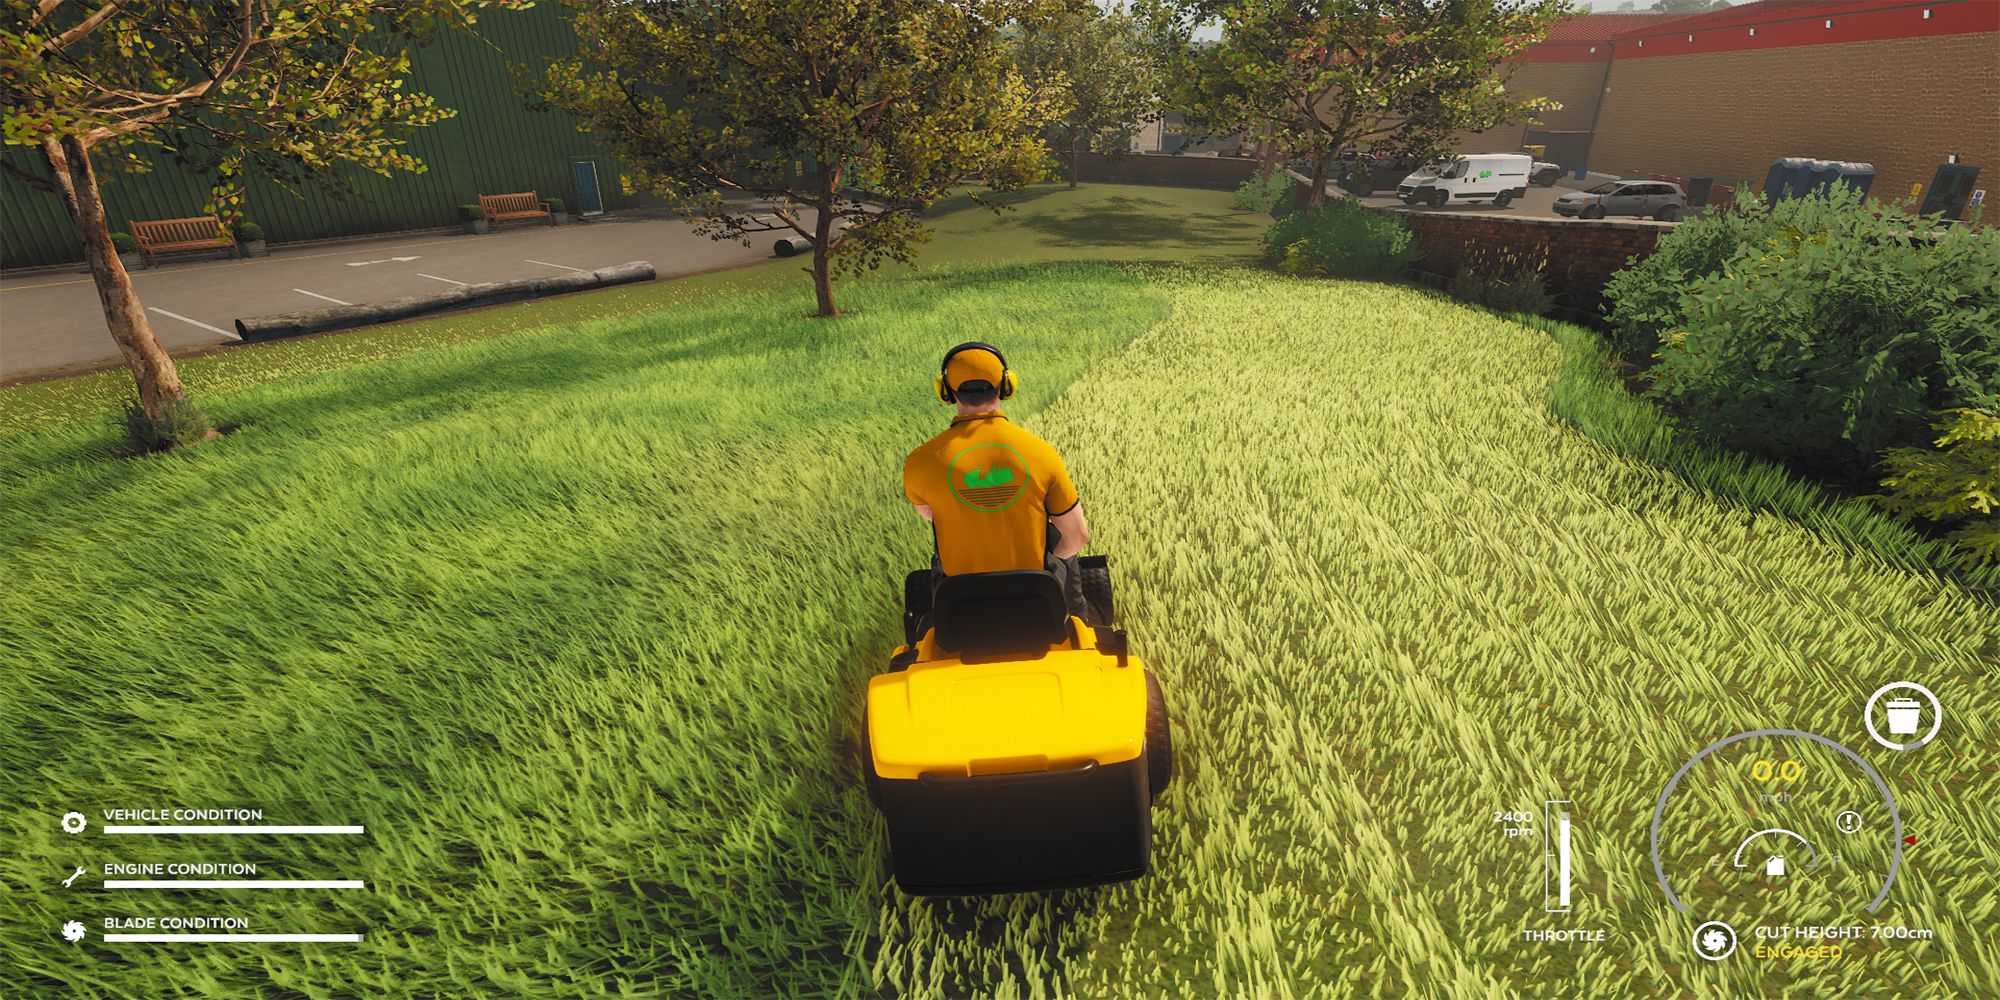 The employee drives the Stiga Estate 2084 H in the Test Drive area. Lawn Mowing Simulator.